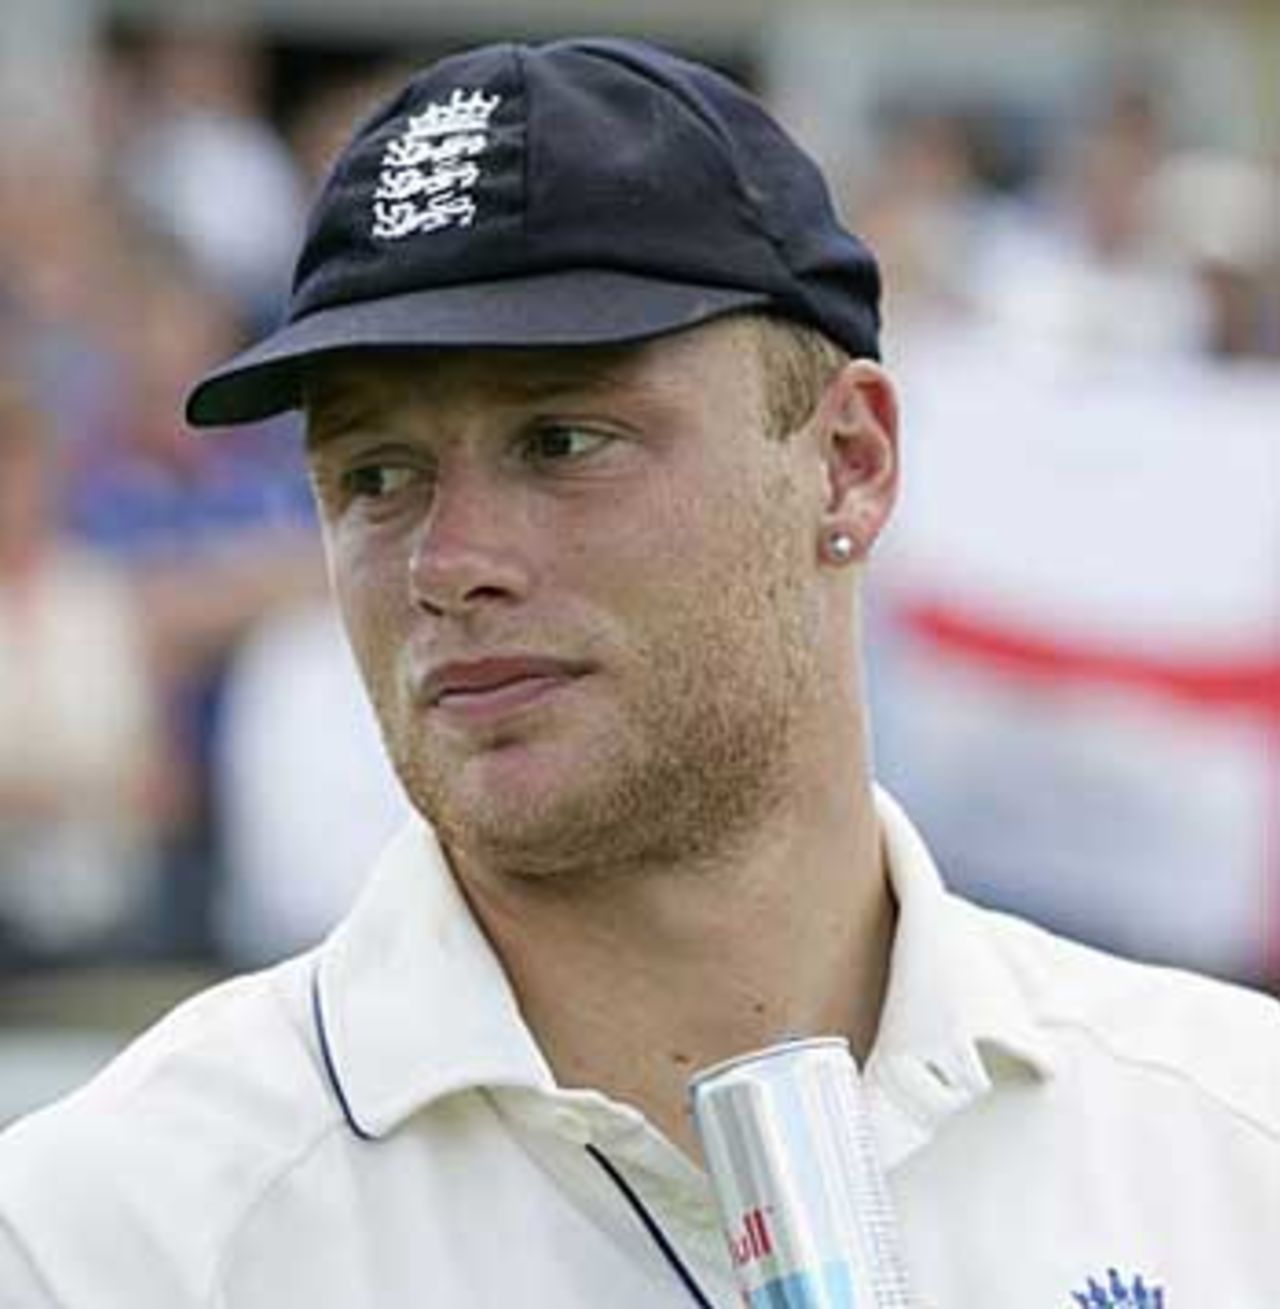 Man-of-the-match Andrew Flintoff, with the S.t. George flag in the background, England v Australia, Edgbaston, August 7, 2005